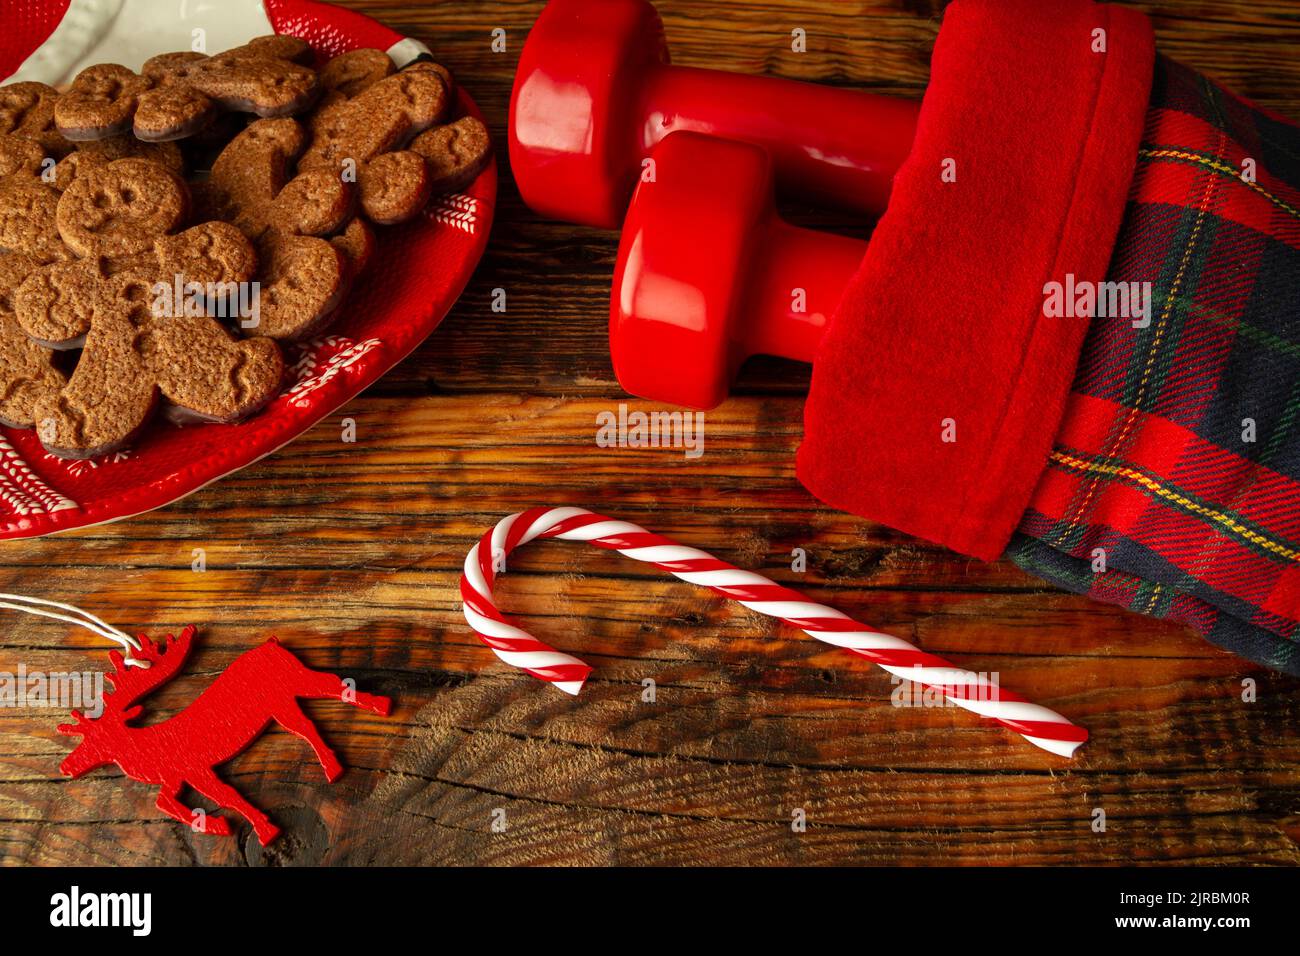 Dumbbells in a stocking. Exercise equipment as Christmas gift idea. Gym fitness holiday season composition, with gingerbread man cookies and ornaments. Stock Photo